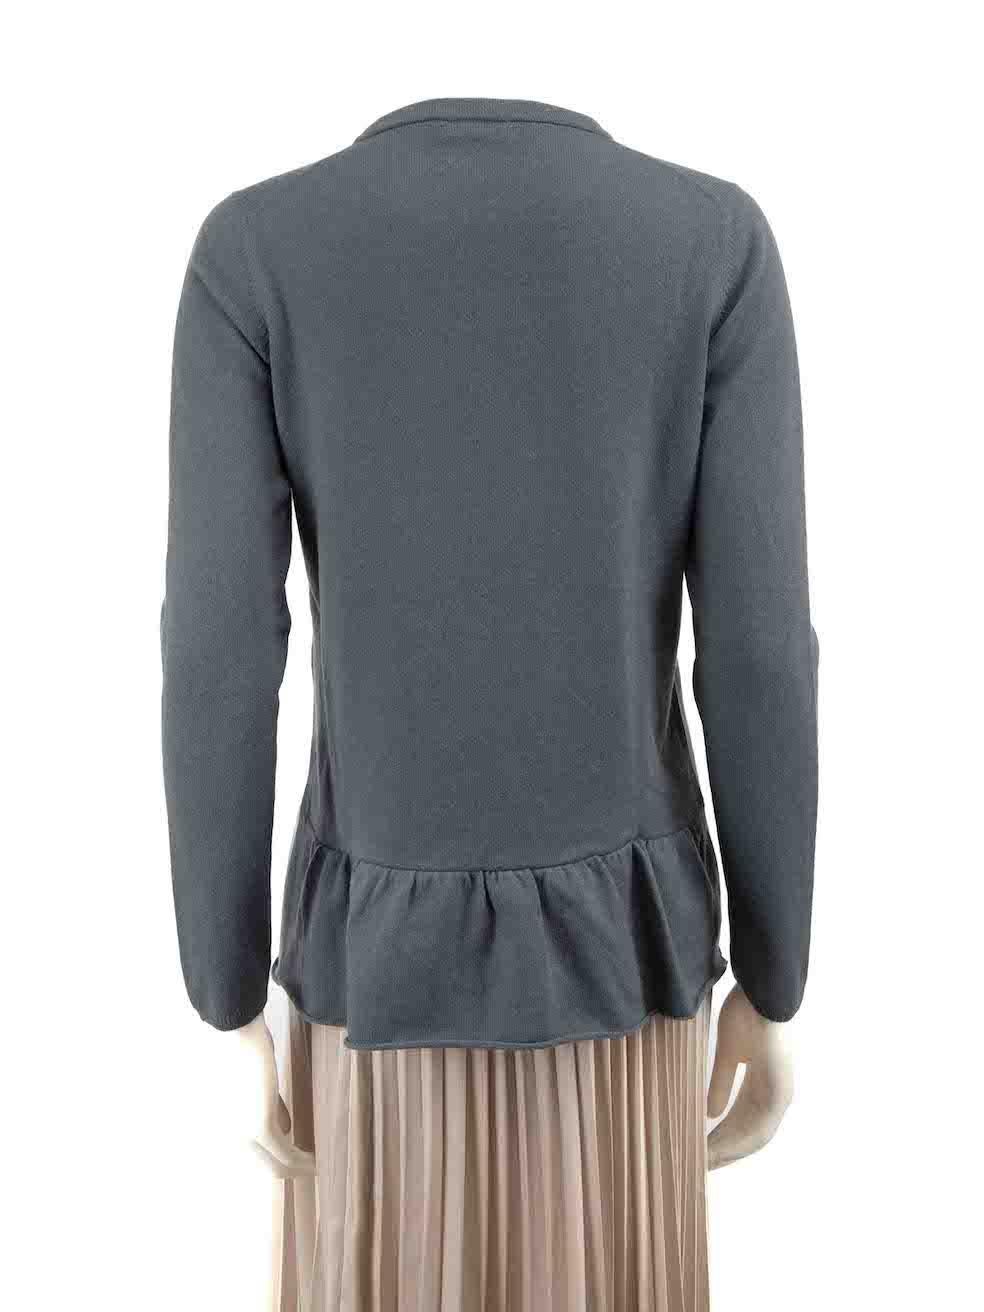 Brunello Cucinelli Blue Cashmere Ruffled Jumper Size M In Good Condition For Sale In London, GB